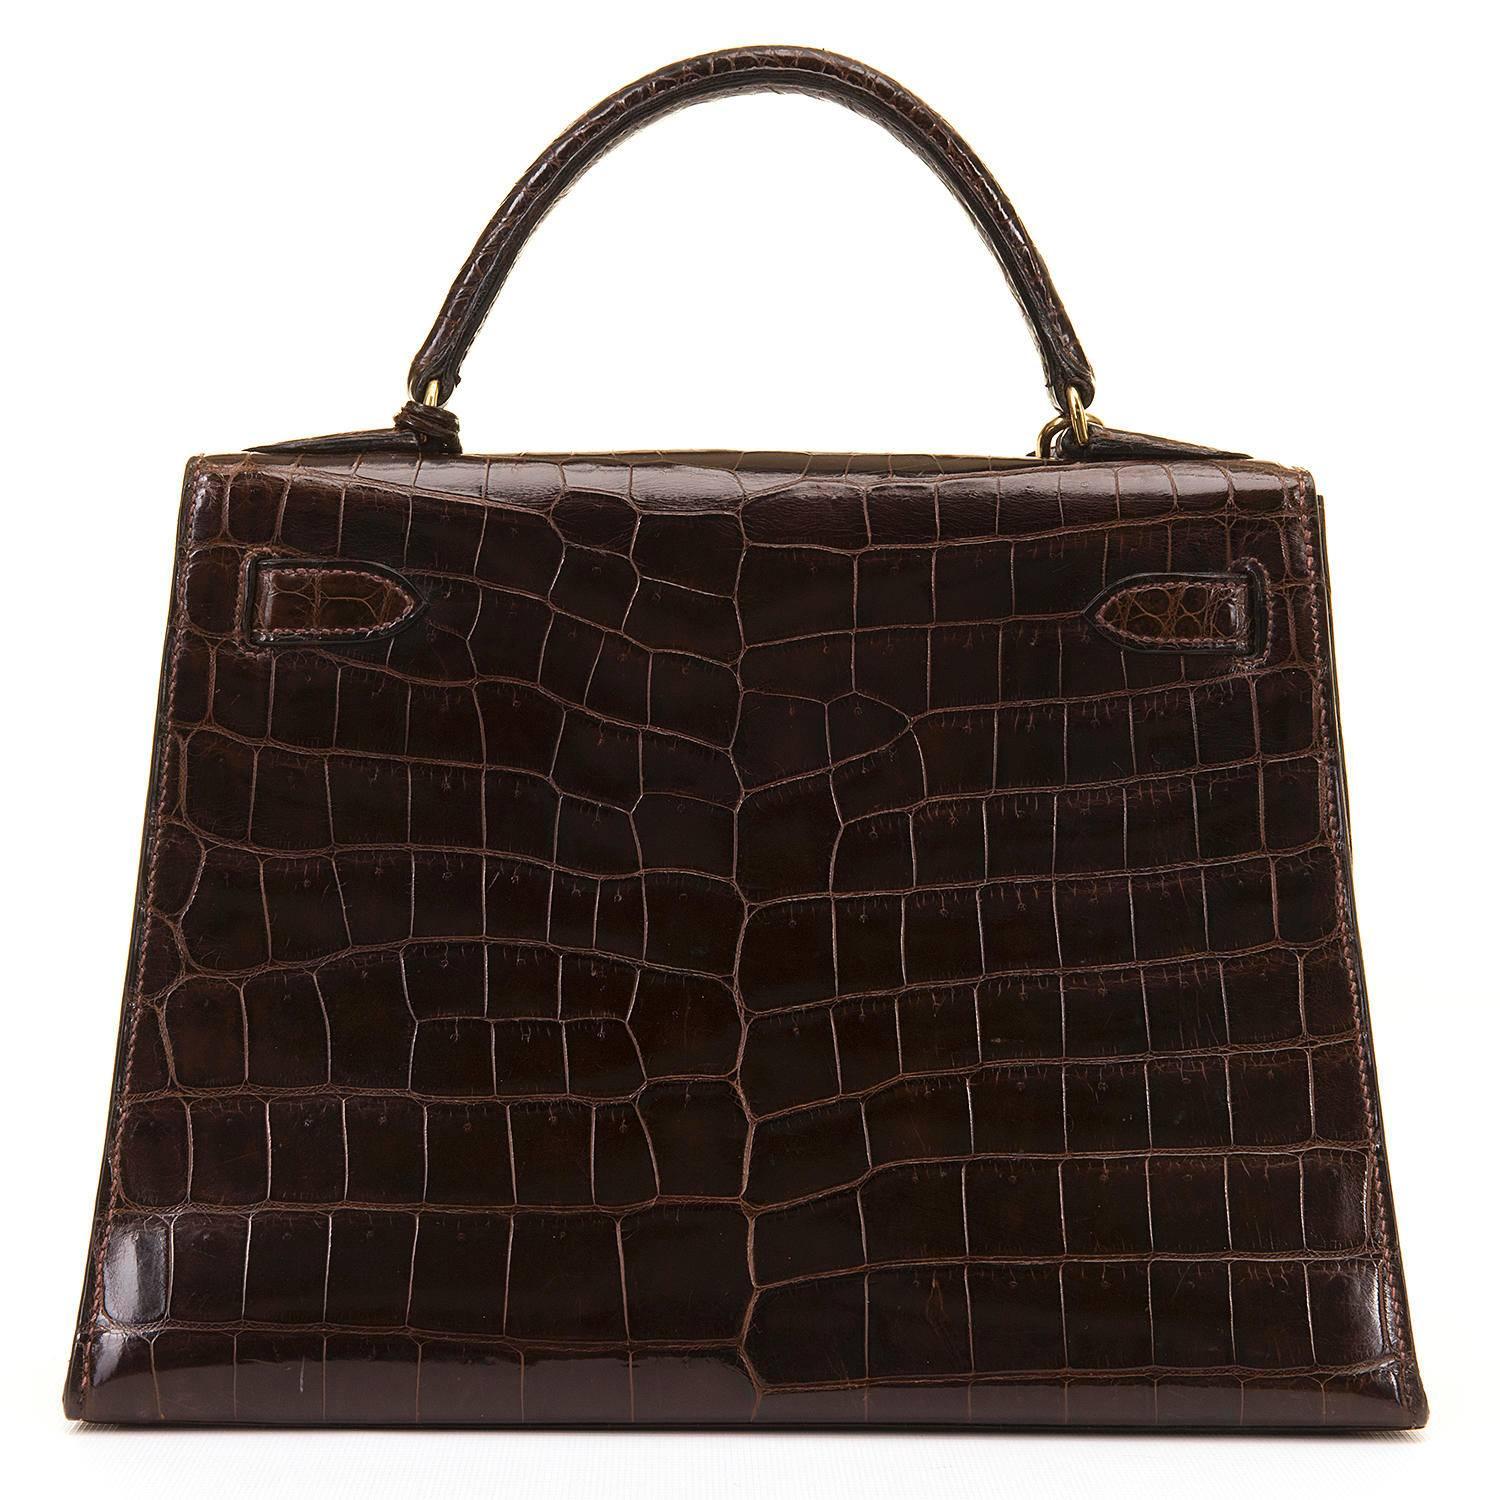 A Pristine Hermes 'Chocolat' Crocodile Kelly Handbag with Goldtone Hardware. This very rare vintage bag comes complete with its padlock, keys & Keyfob, with the interior being finished in matching Chèvre leather. Sourced from a private collection